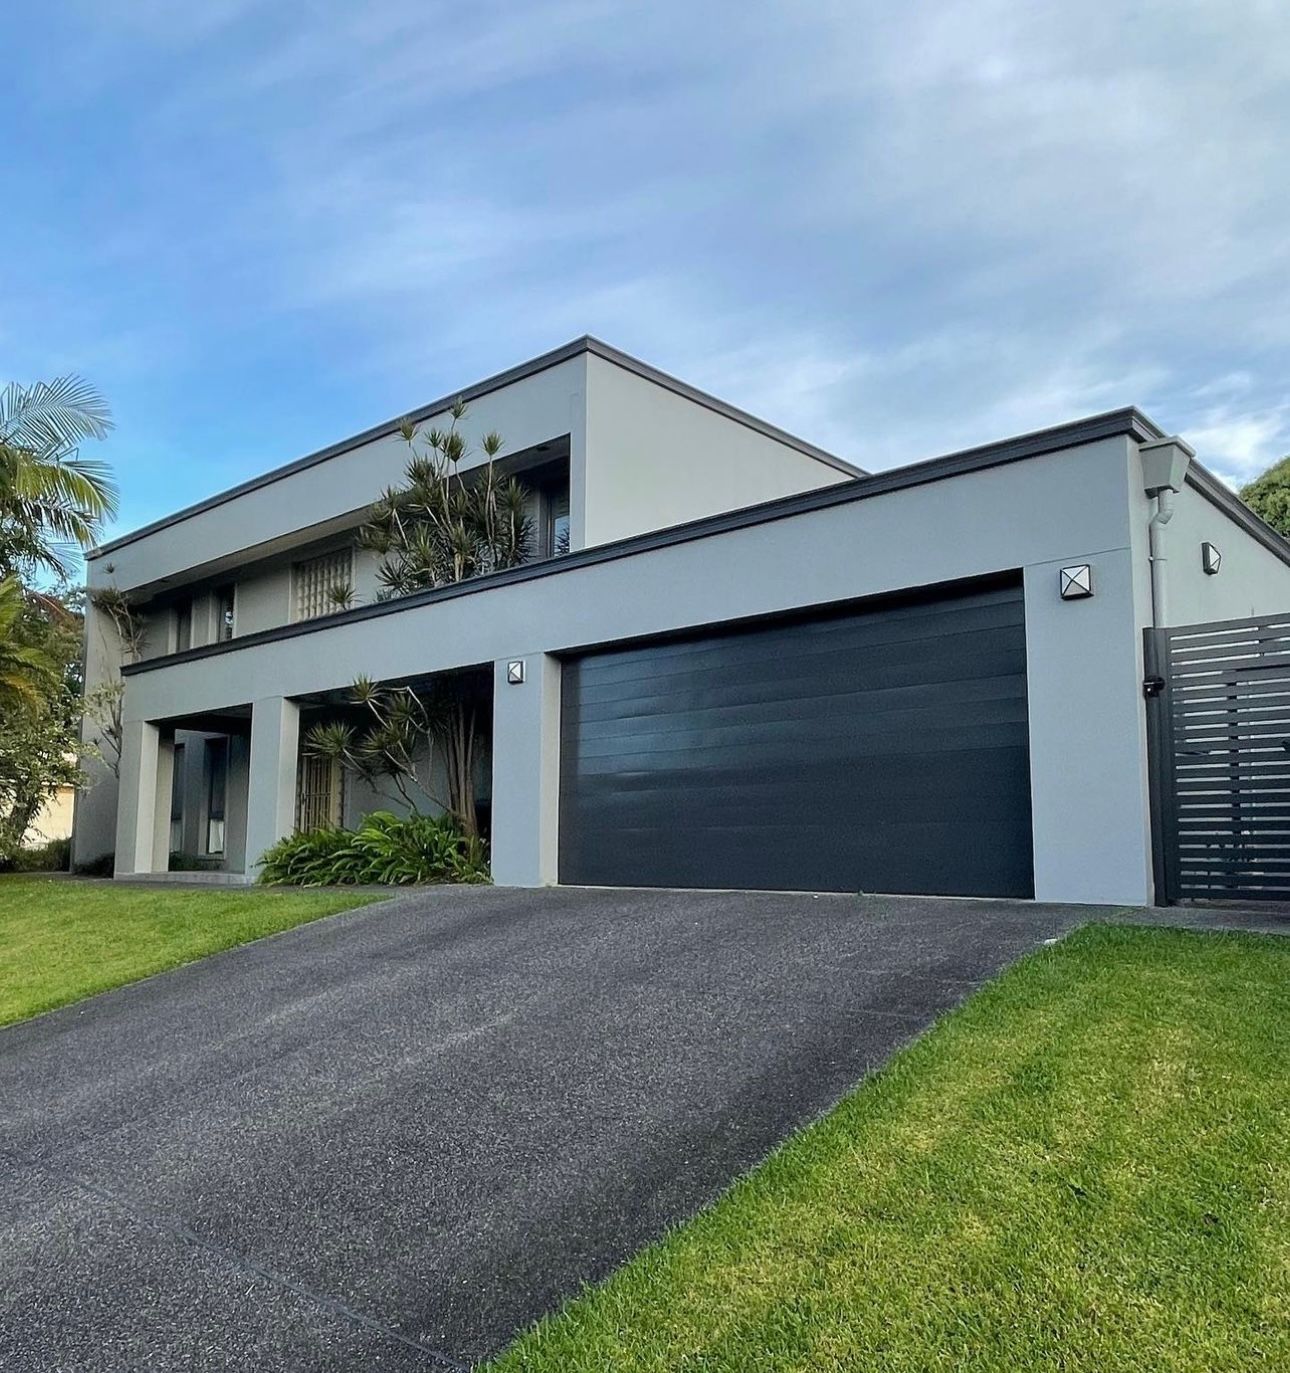 Driveway View of House — Painter In Newcastle, NSW